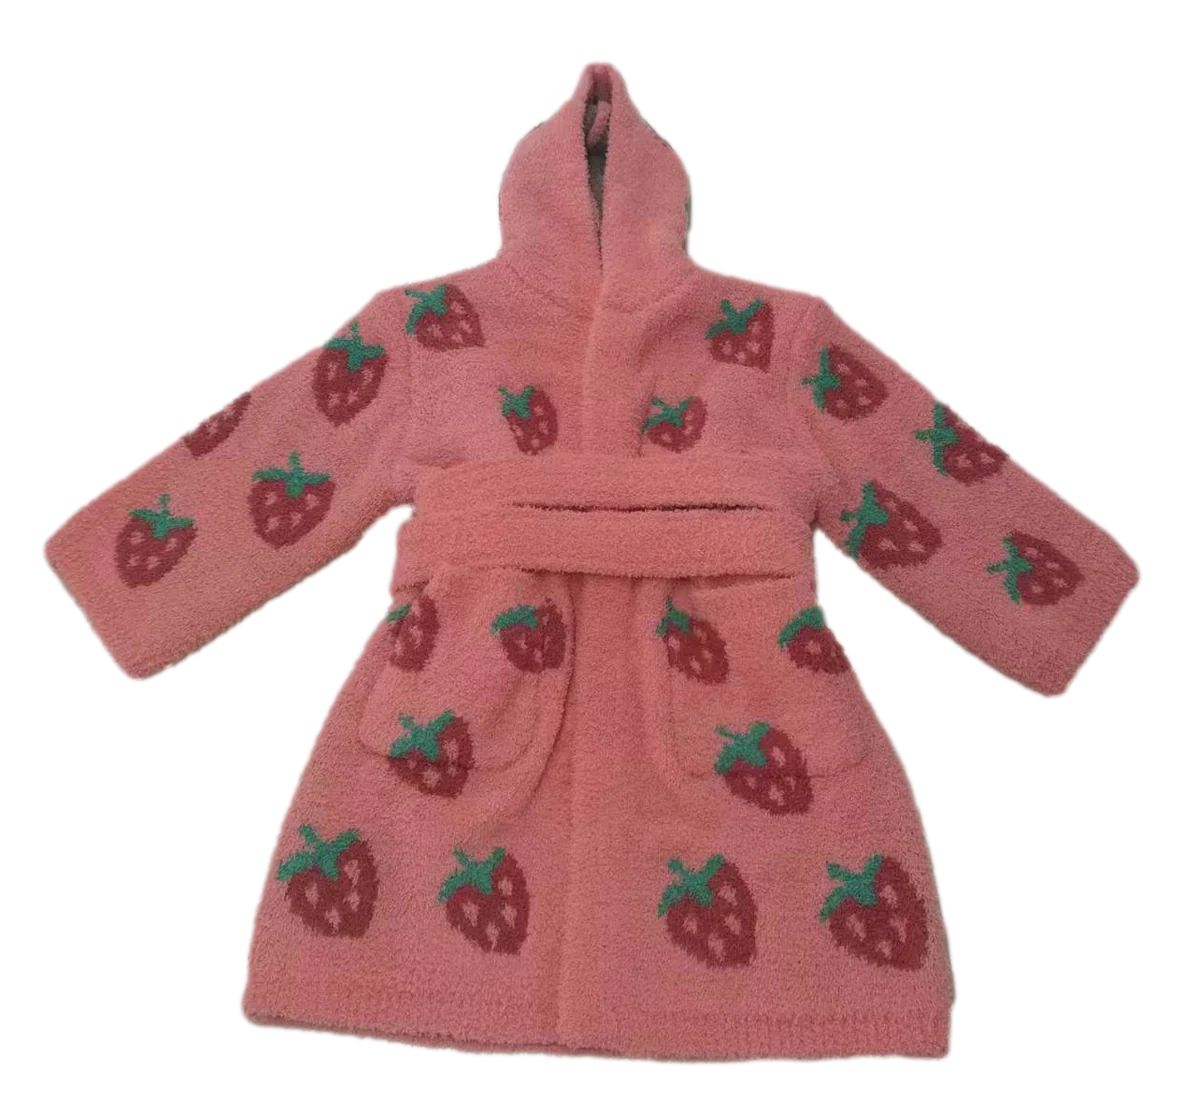 TSC x Madi Nelson: Strawberries Mama + Mini Robes | The Styled Collection